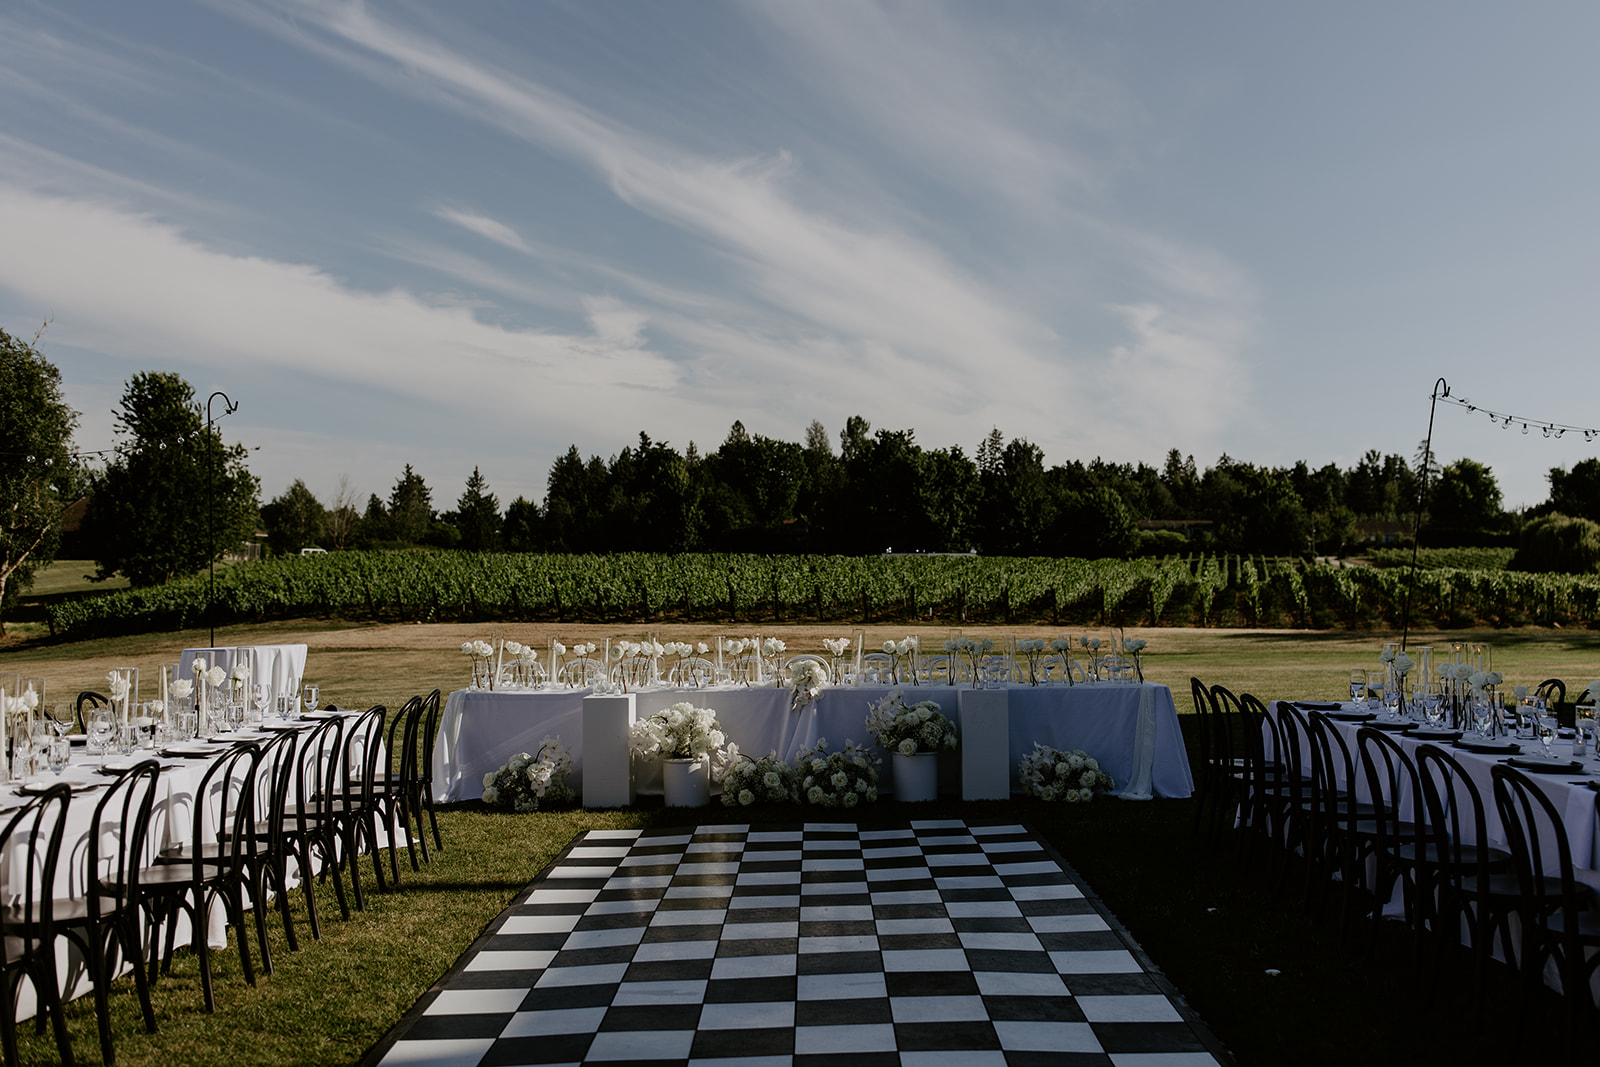 A modern and luxury outdoor wedding at Cannon Estate Winery in Abbotsford, BC